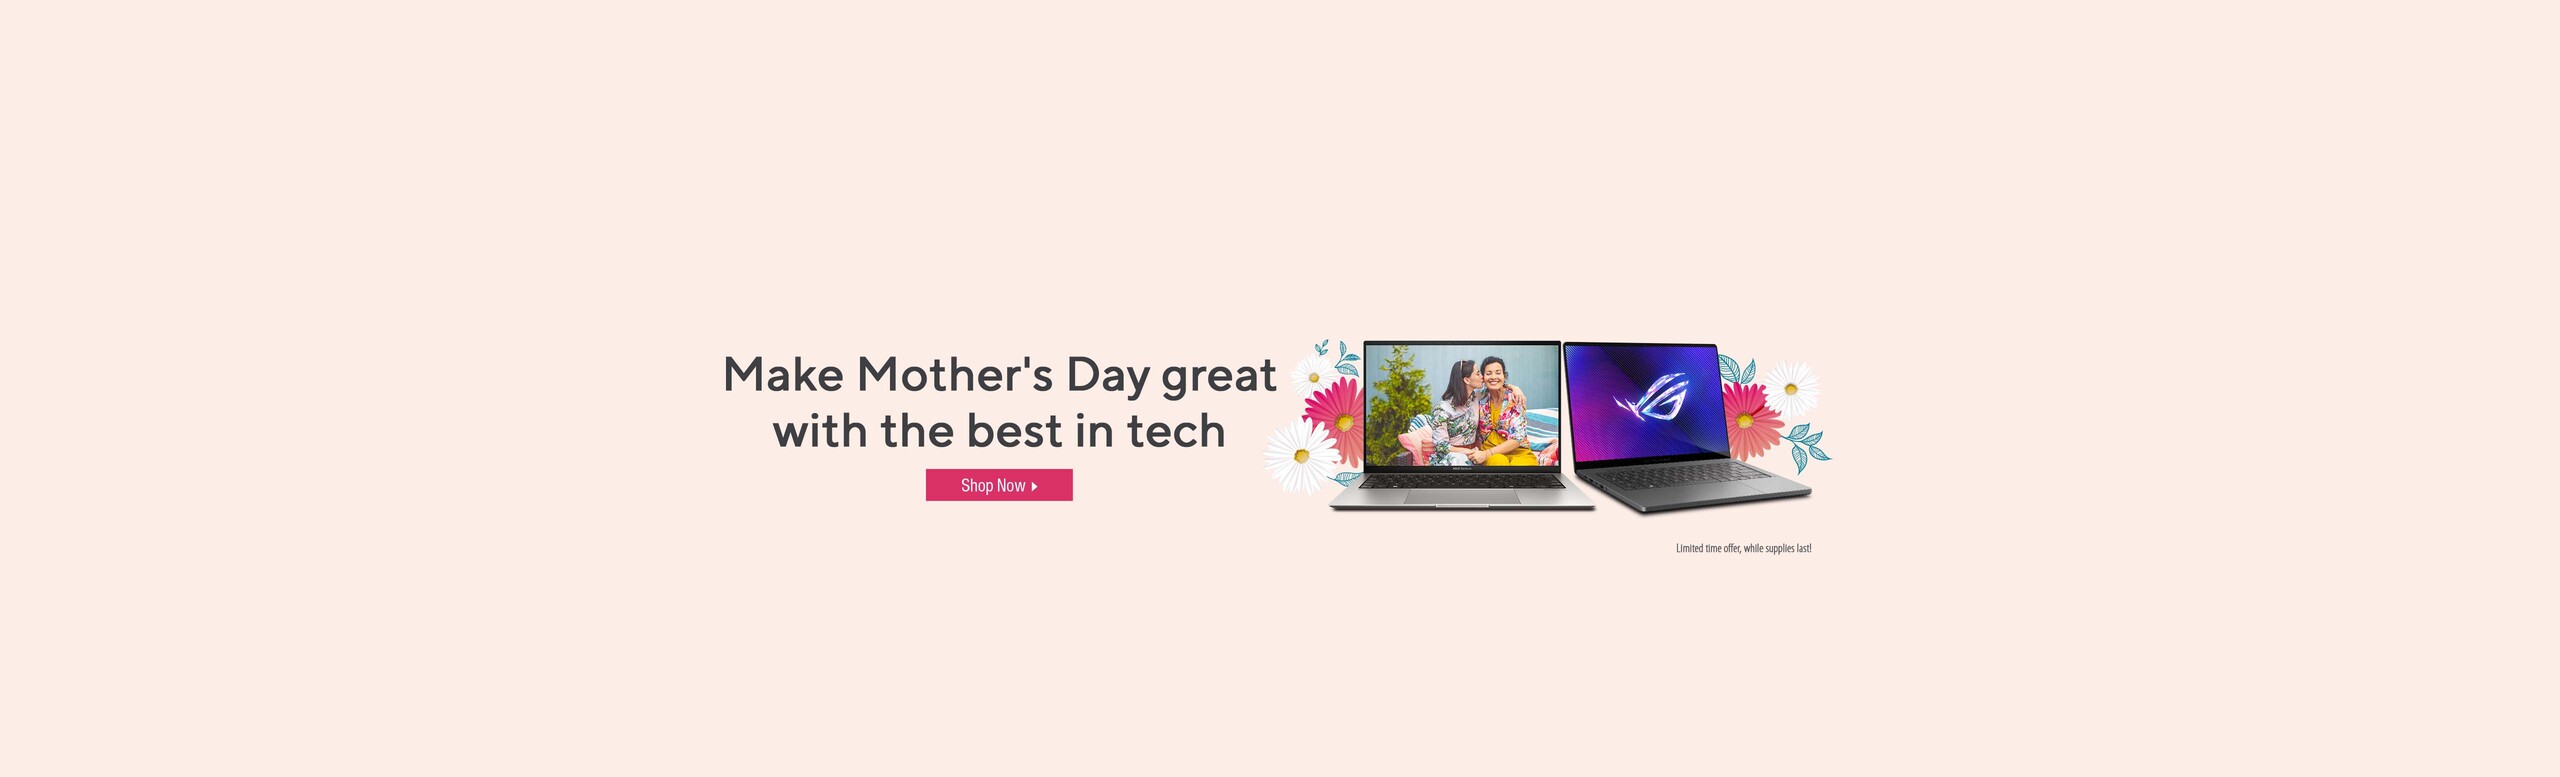 Image of flowers and laptops.  Make Mother's Day great with the best in tech.  Limited time offer, while supplies last.  Shop now